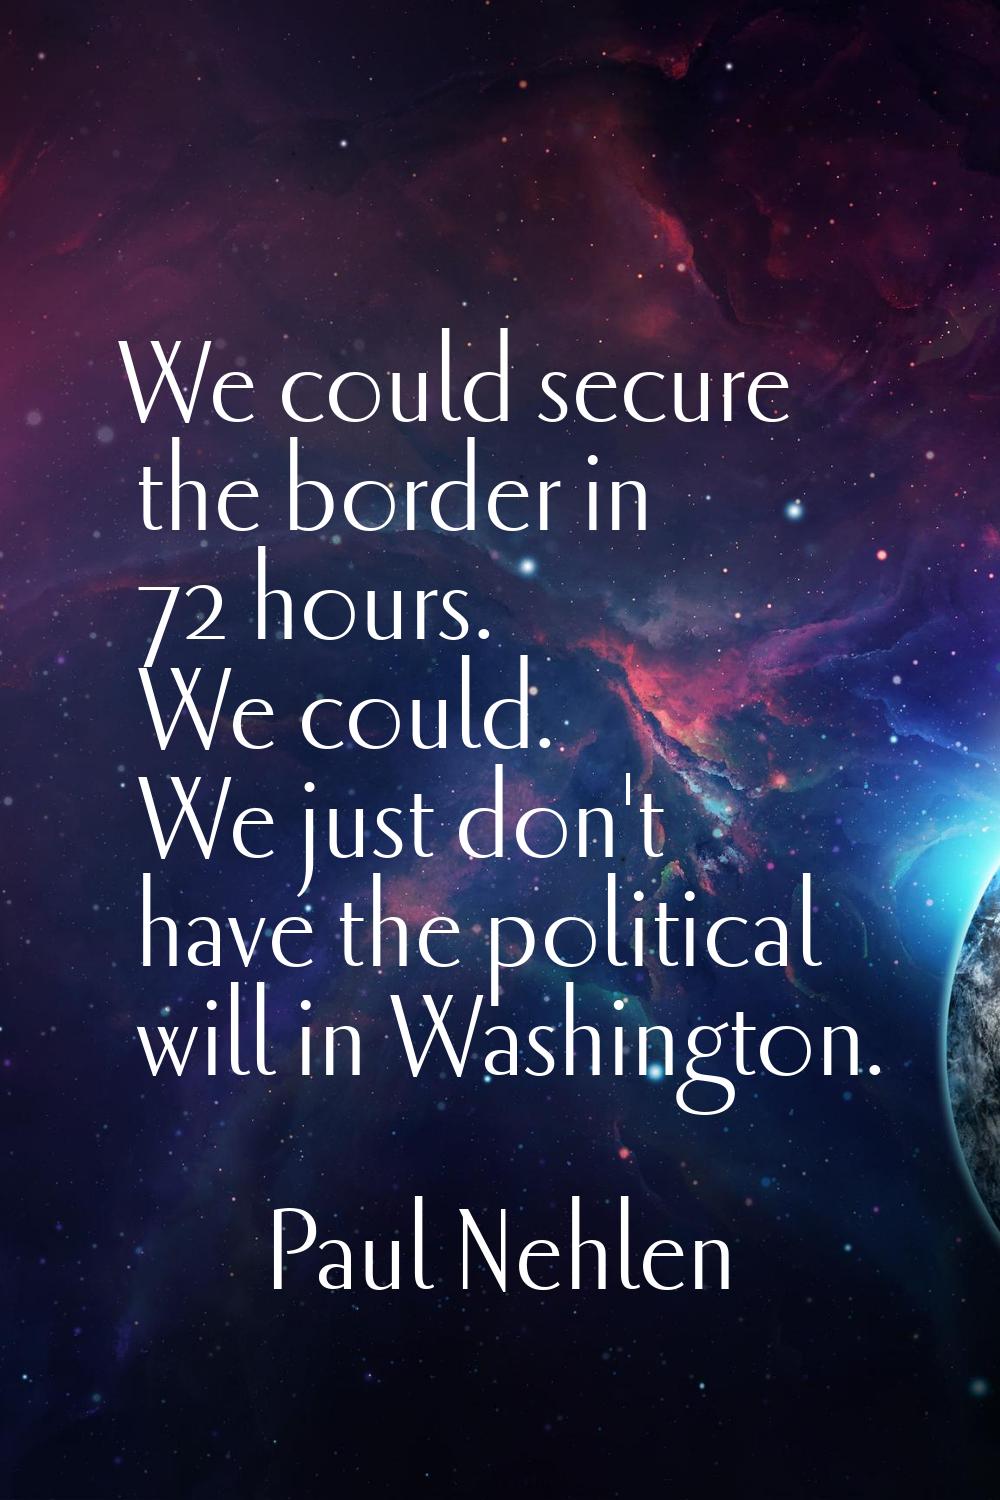 We could secure the border in 72 hours. We could. We just don't have the political will in Washingt